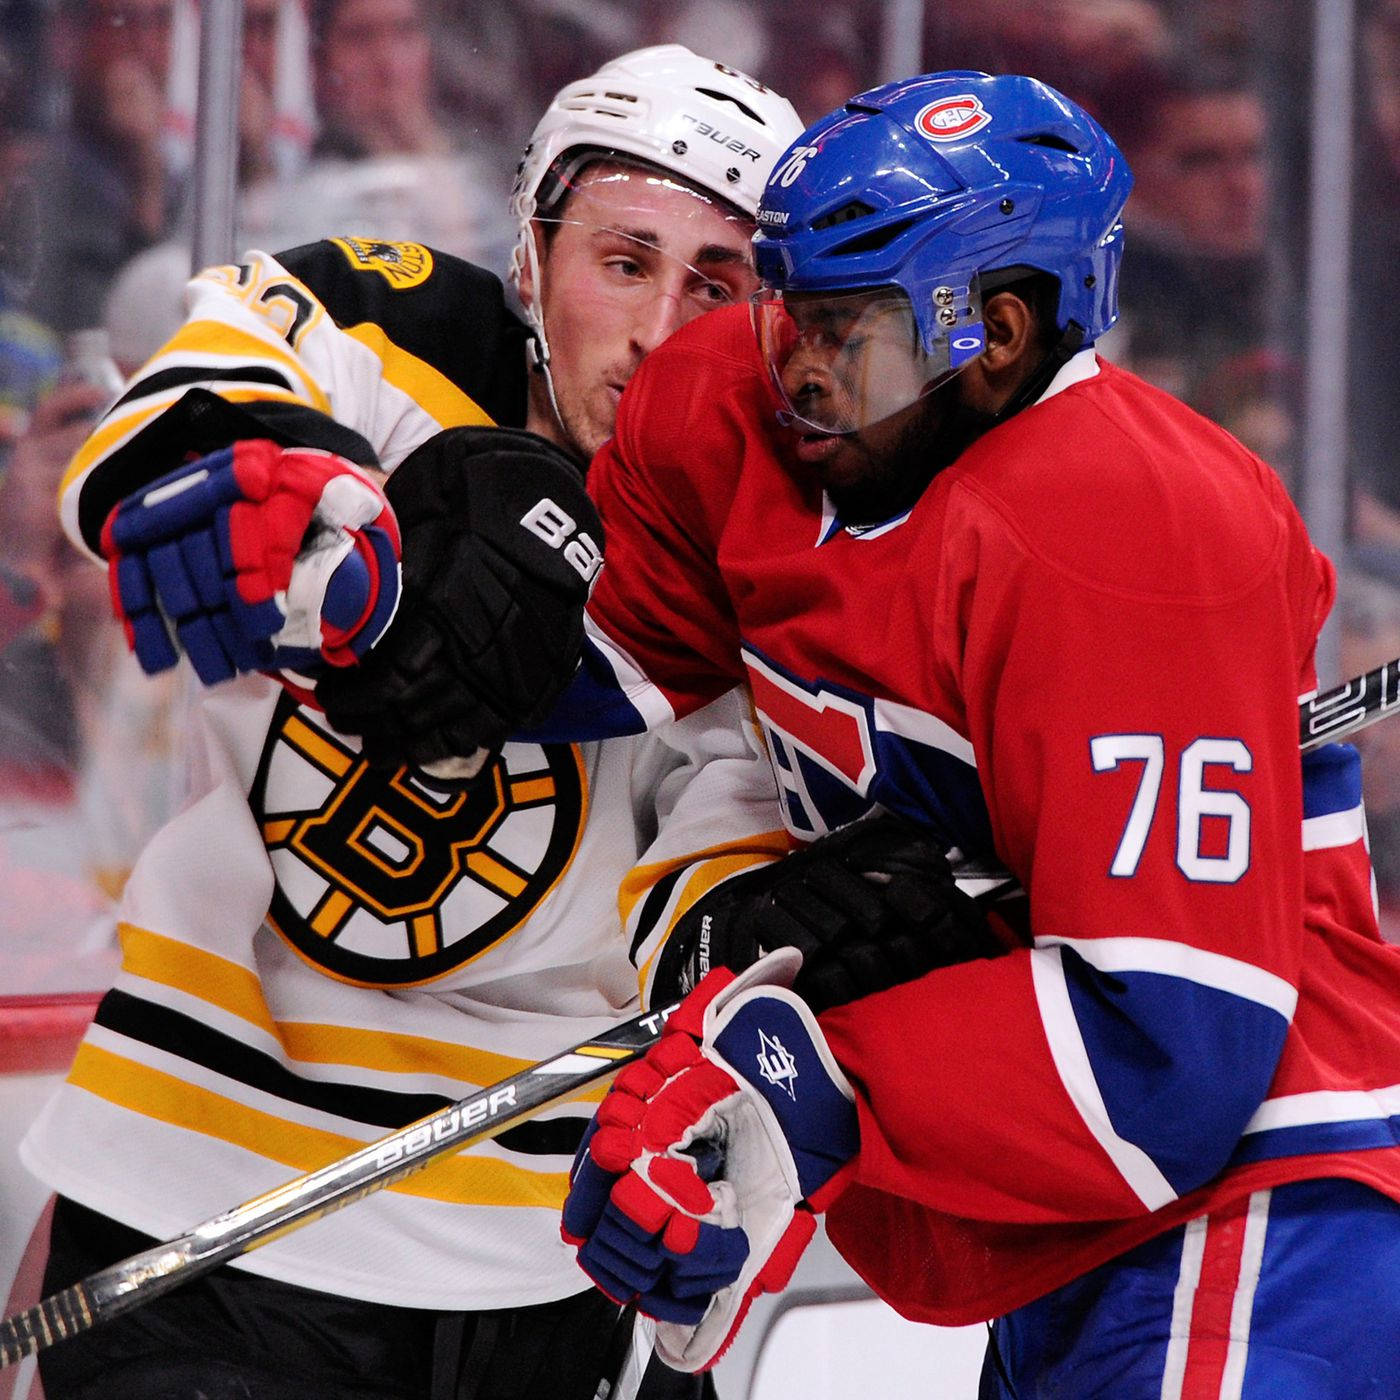 Boston Bruins Forward Brad Marchand In A Face-off Against P.k. Subban. Background